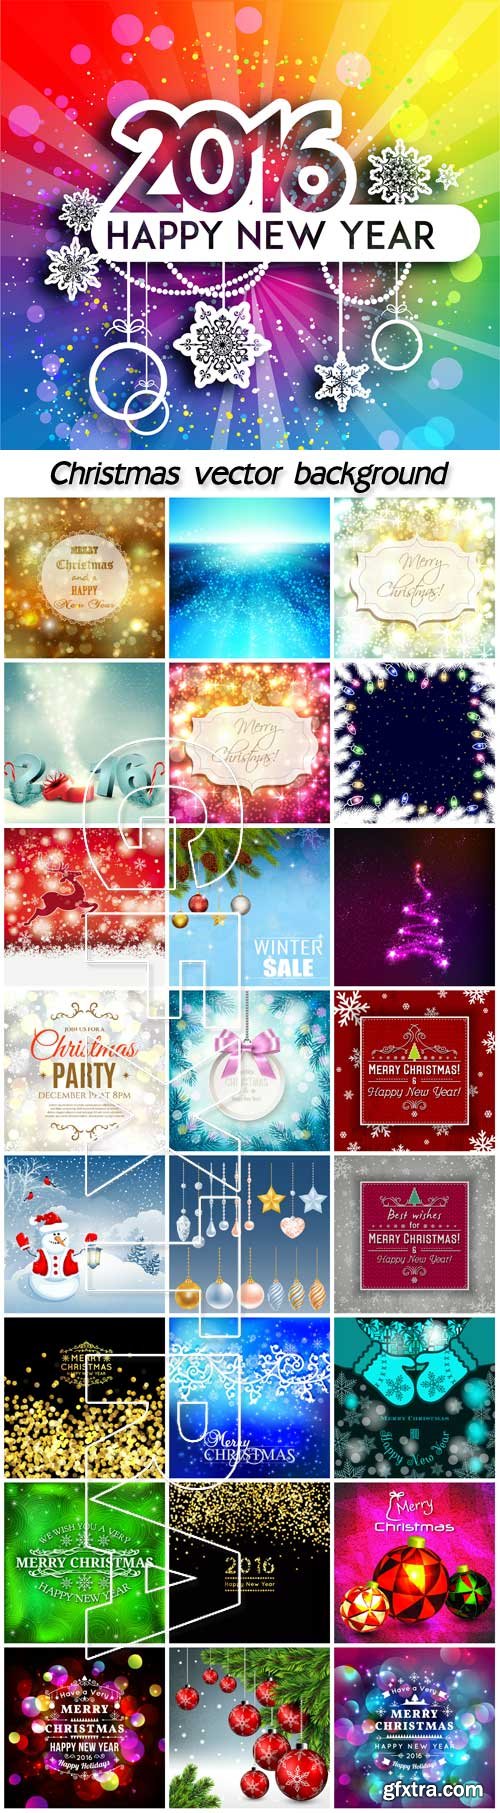 Collection of different vector Christmas